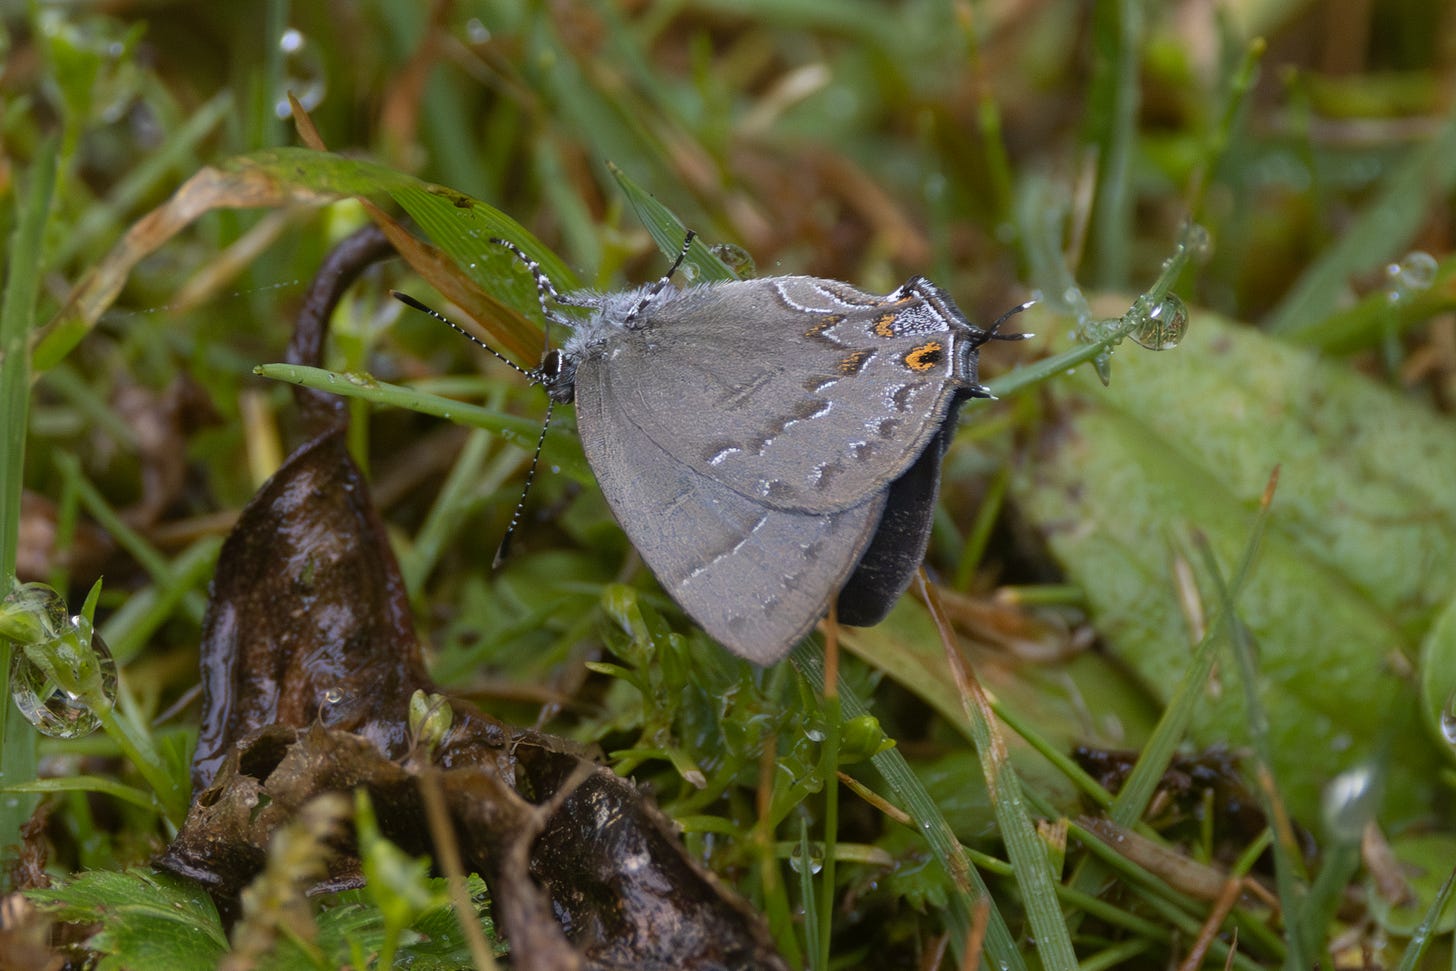 a tiny gray butterfly with striped legs hanging upside down from a blade of grass. it is facing left. it has an orange spot and little tails on the edge of its hindwings, which also have a few gray stripes on them.